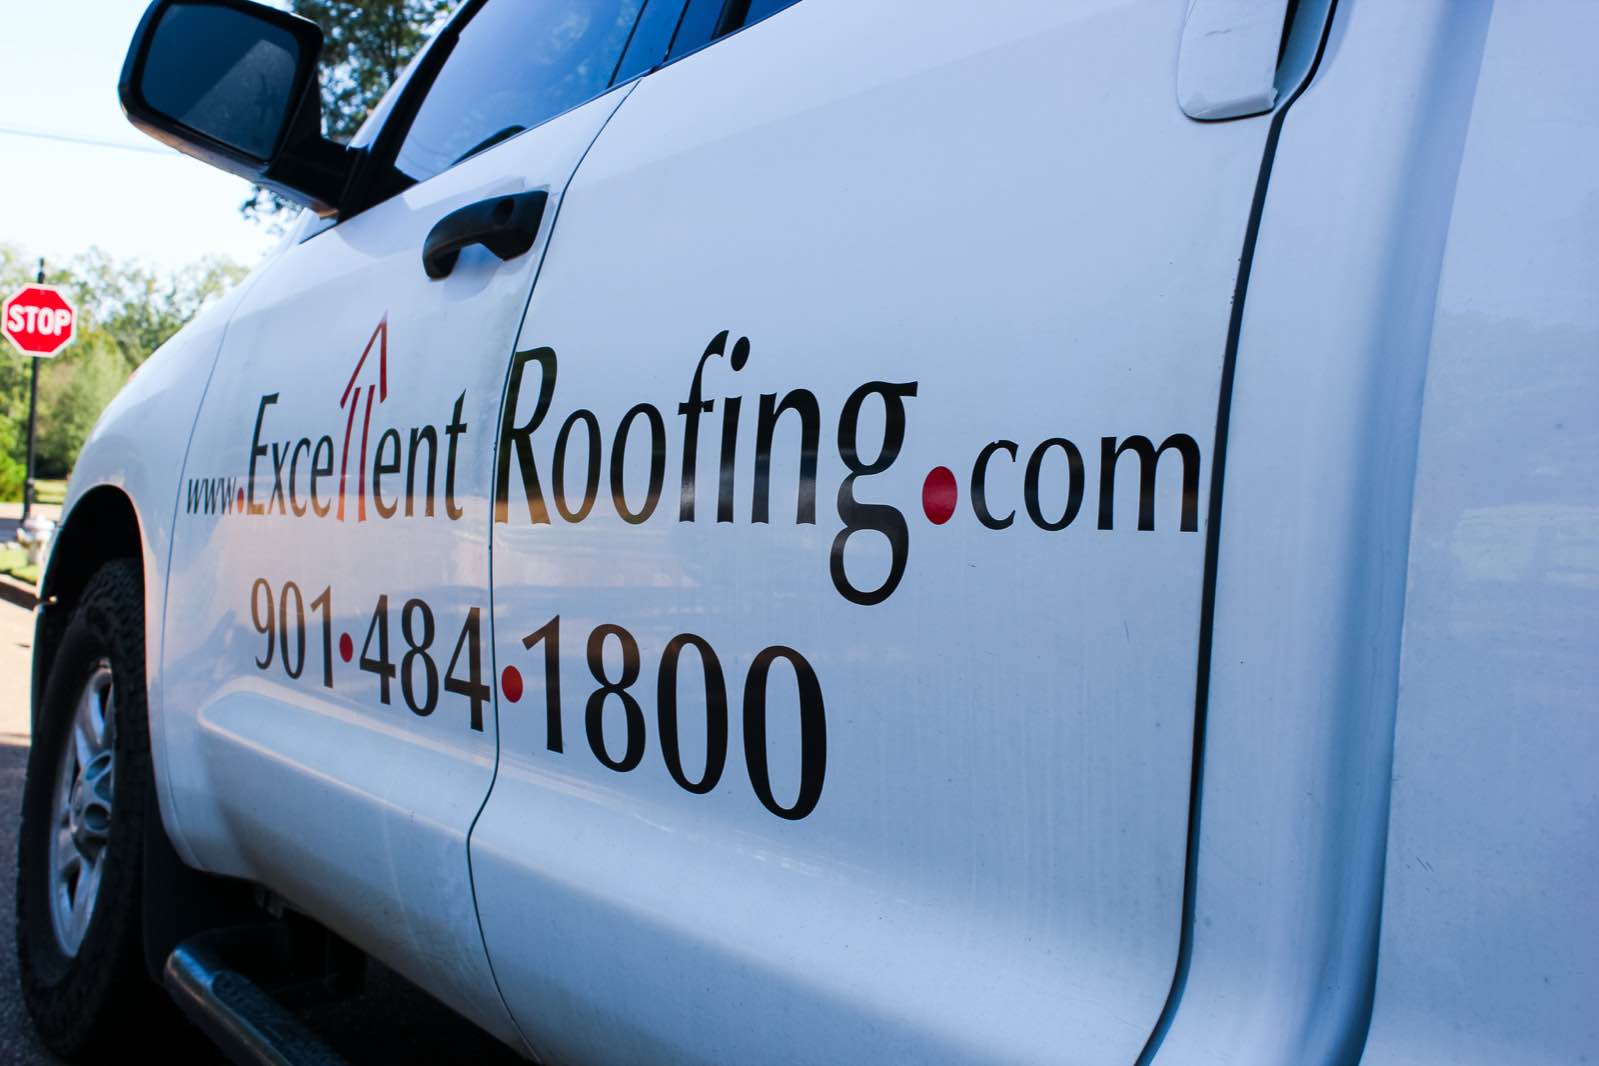 contact the roofing company customers prefer in Memphis Excellent Roofing